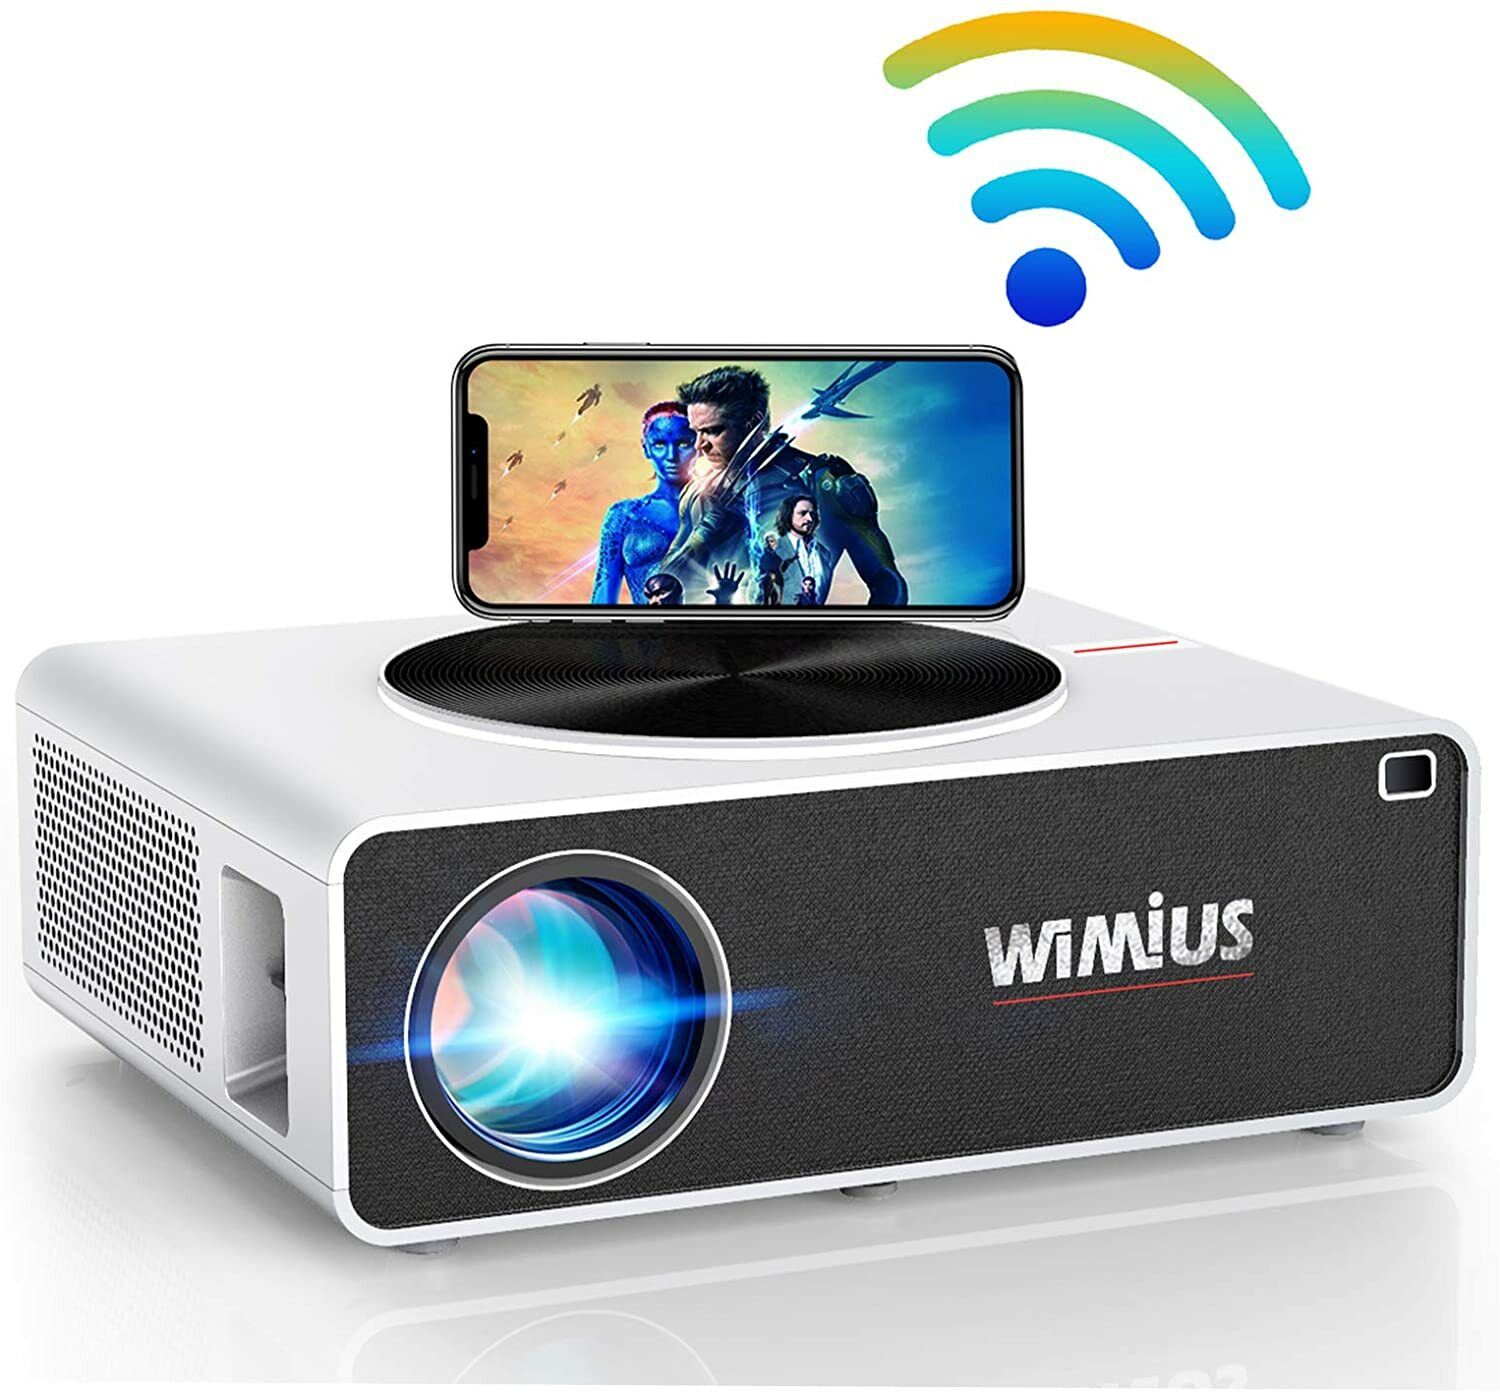 WiMiUS K3 7500 Lux Video Wi Fi Projector White 1920x1080 LED 10000:1 Contrast 